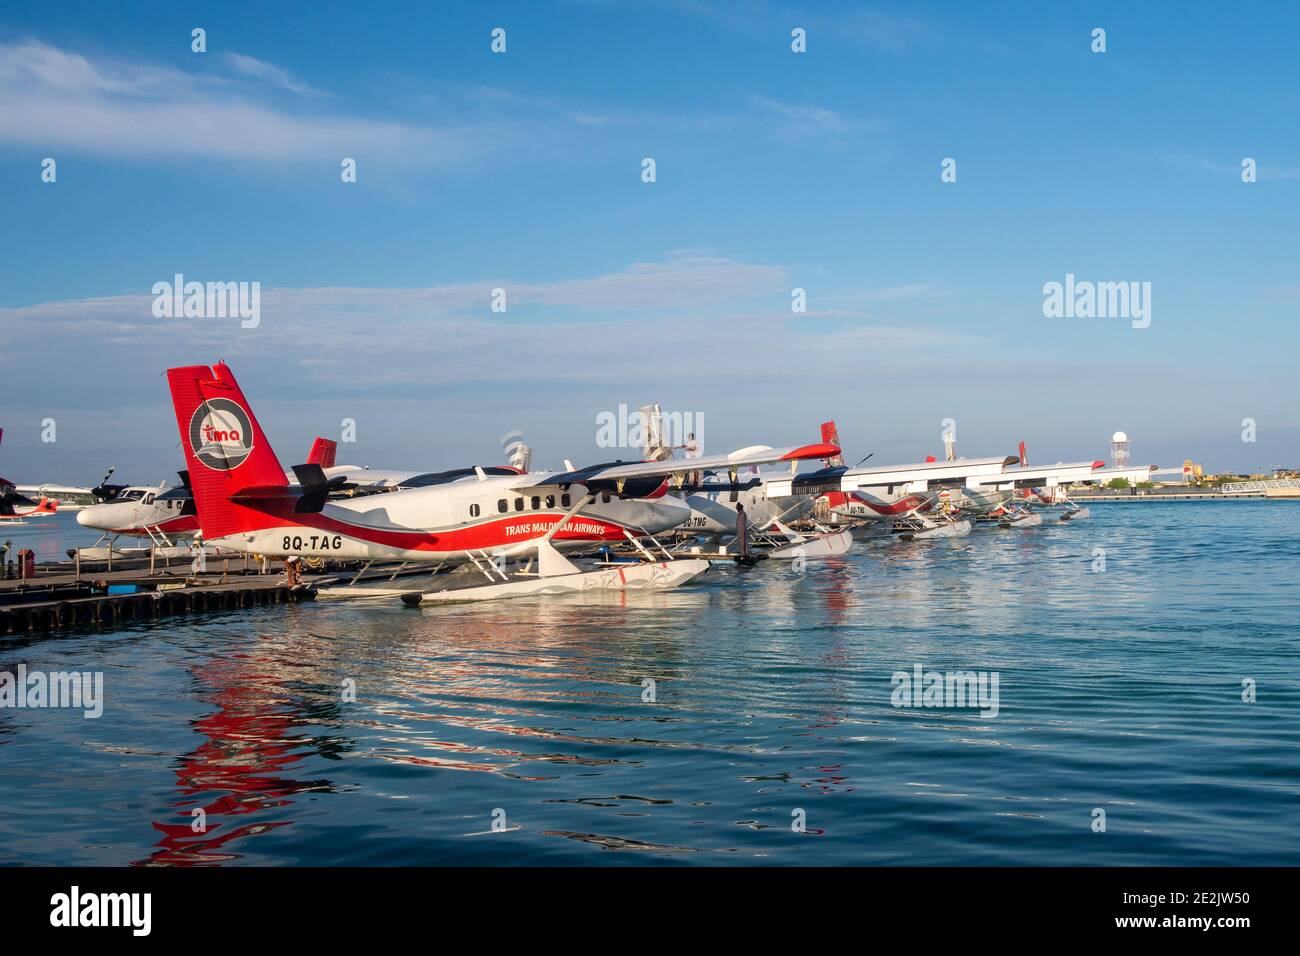 Male, Maldives, 20.11.2020. Trans Maldivian Airways terminal and dock, with seaplanes Twin Otter Series 400 fleet docked. Stock Photo